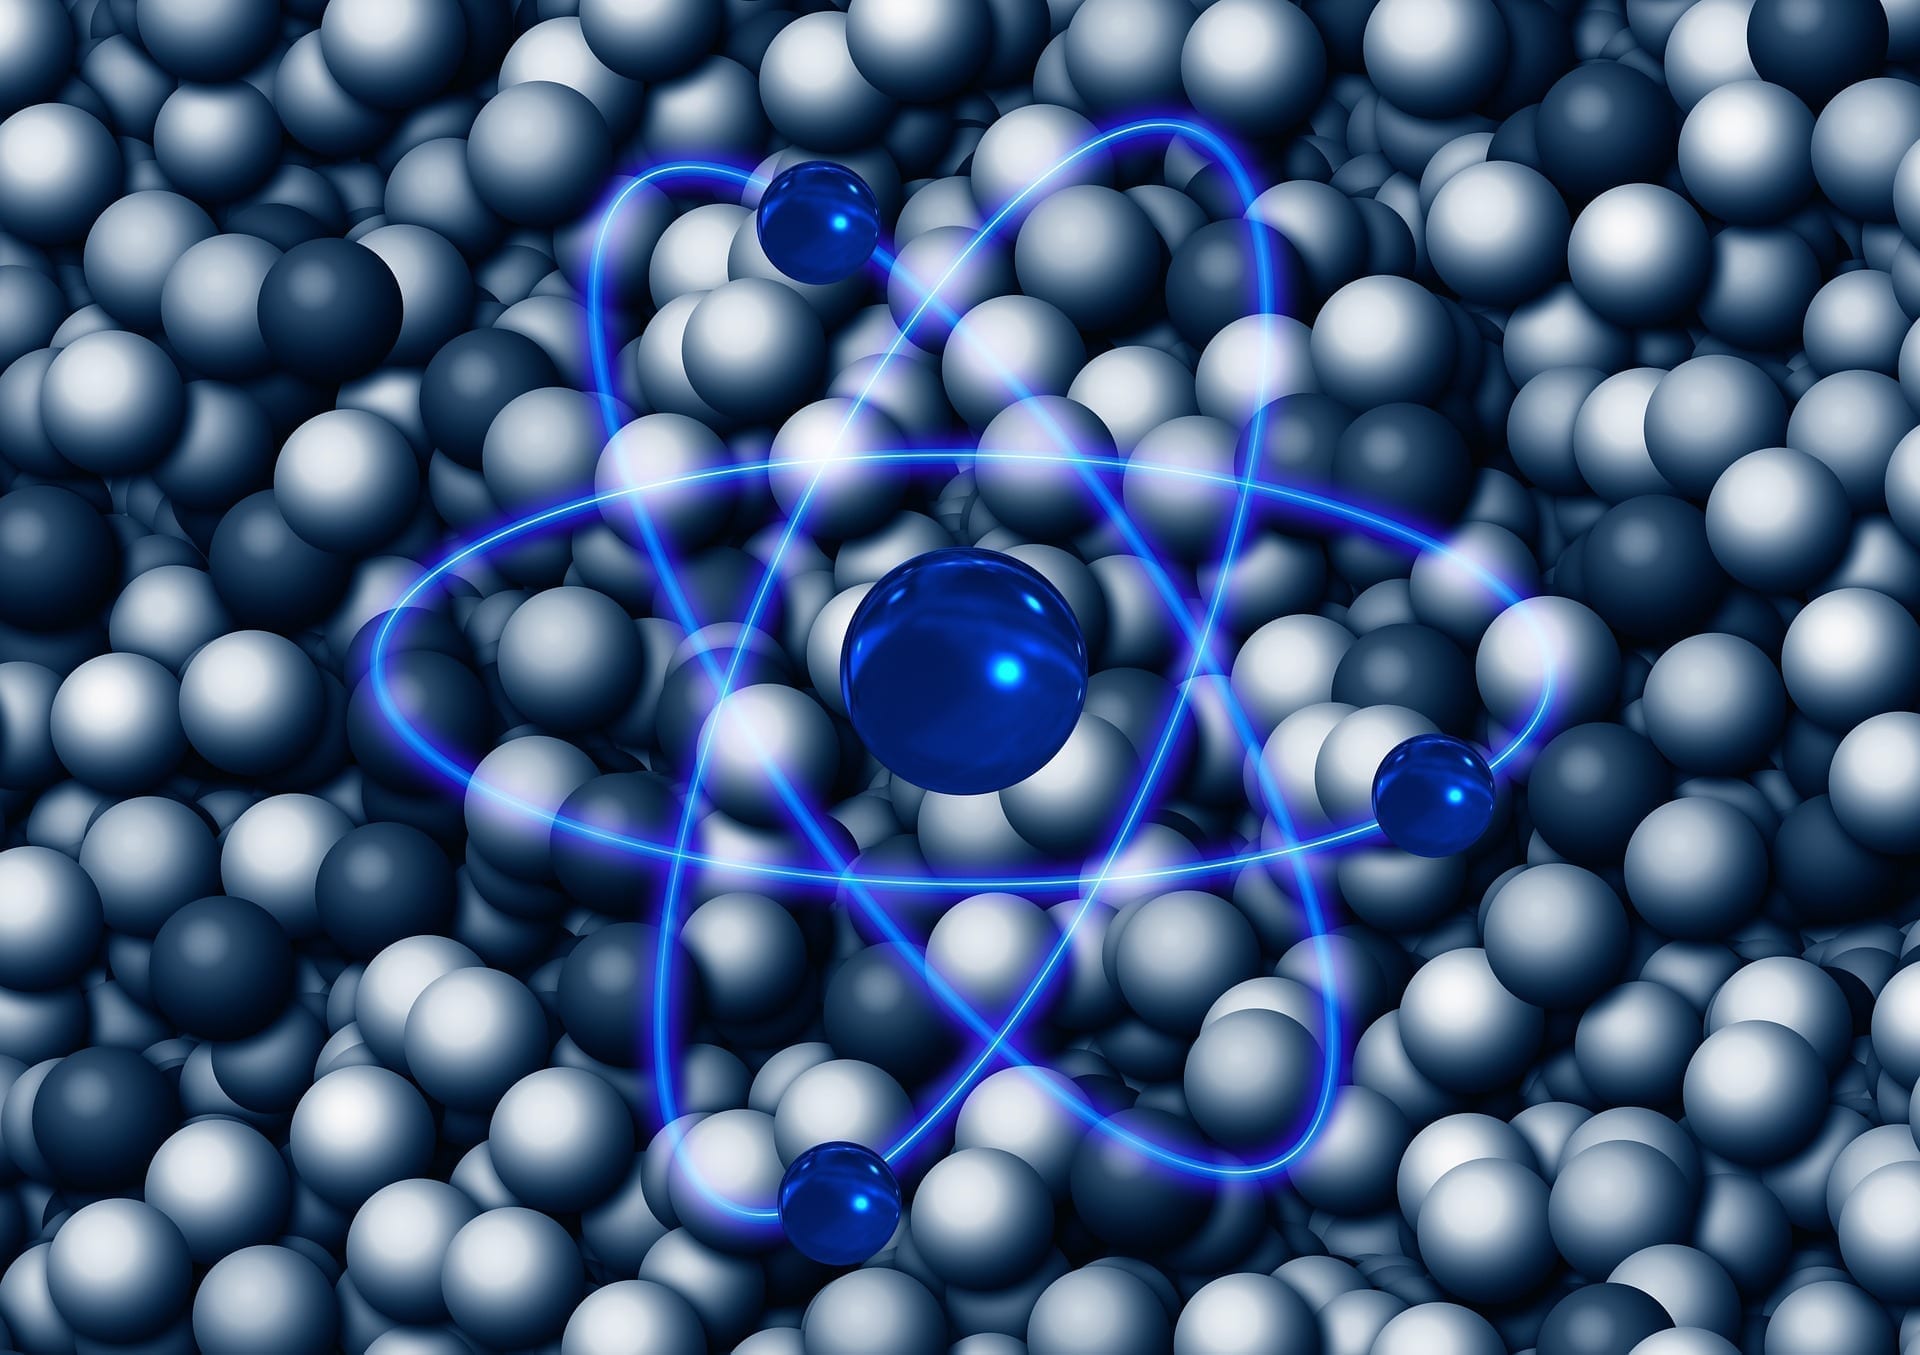 Atom graphic with spherical depictions in the background, photo credit: Pixabay